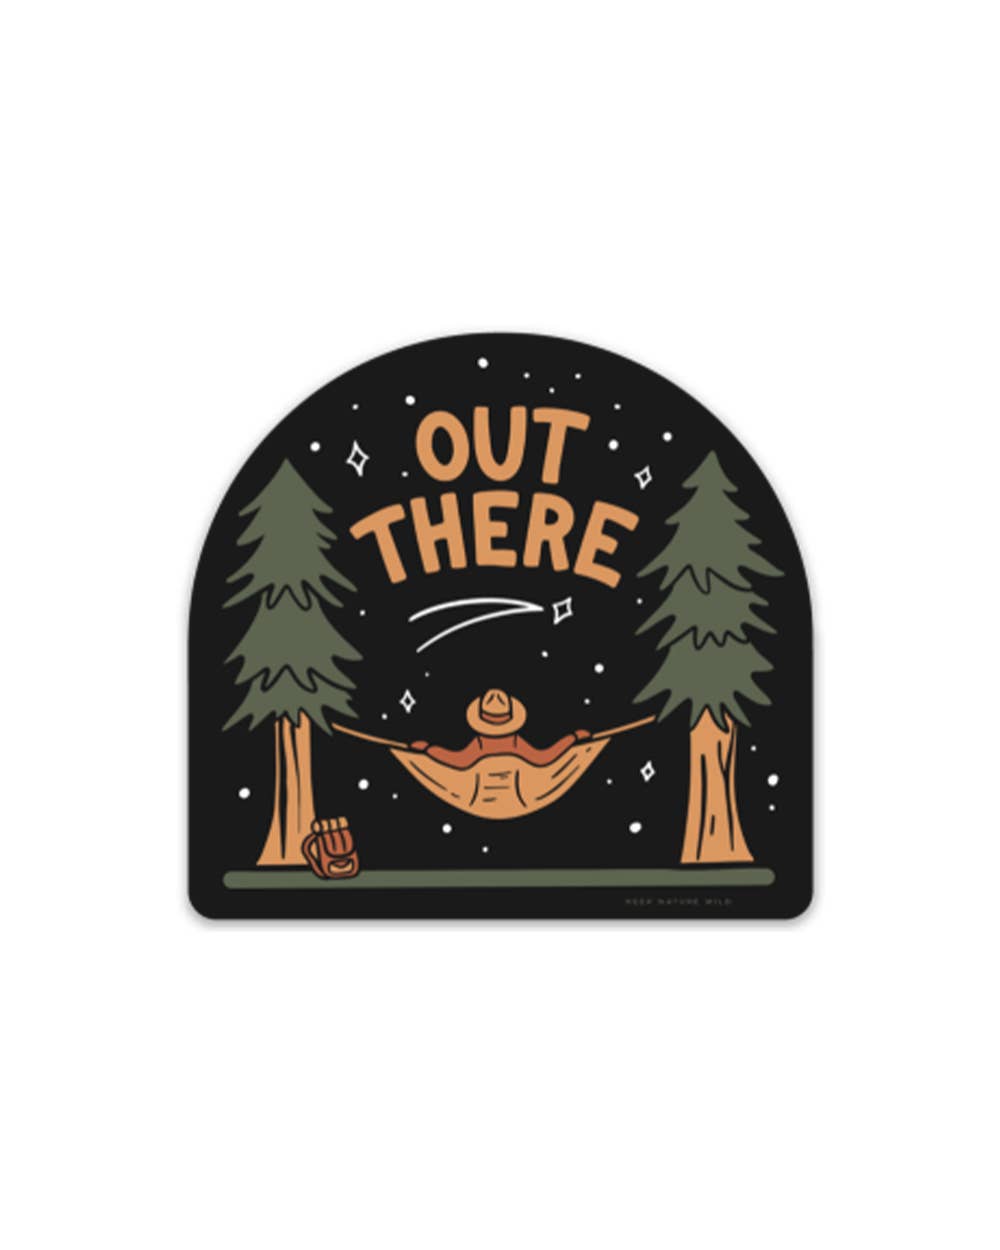 Out There night hammock sticker by Keep Nature Wild